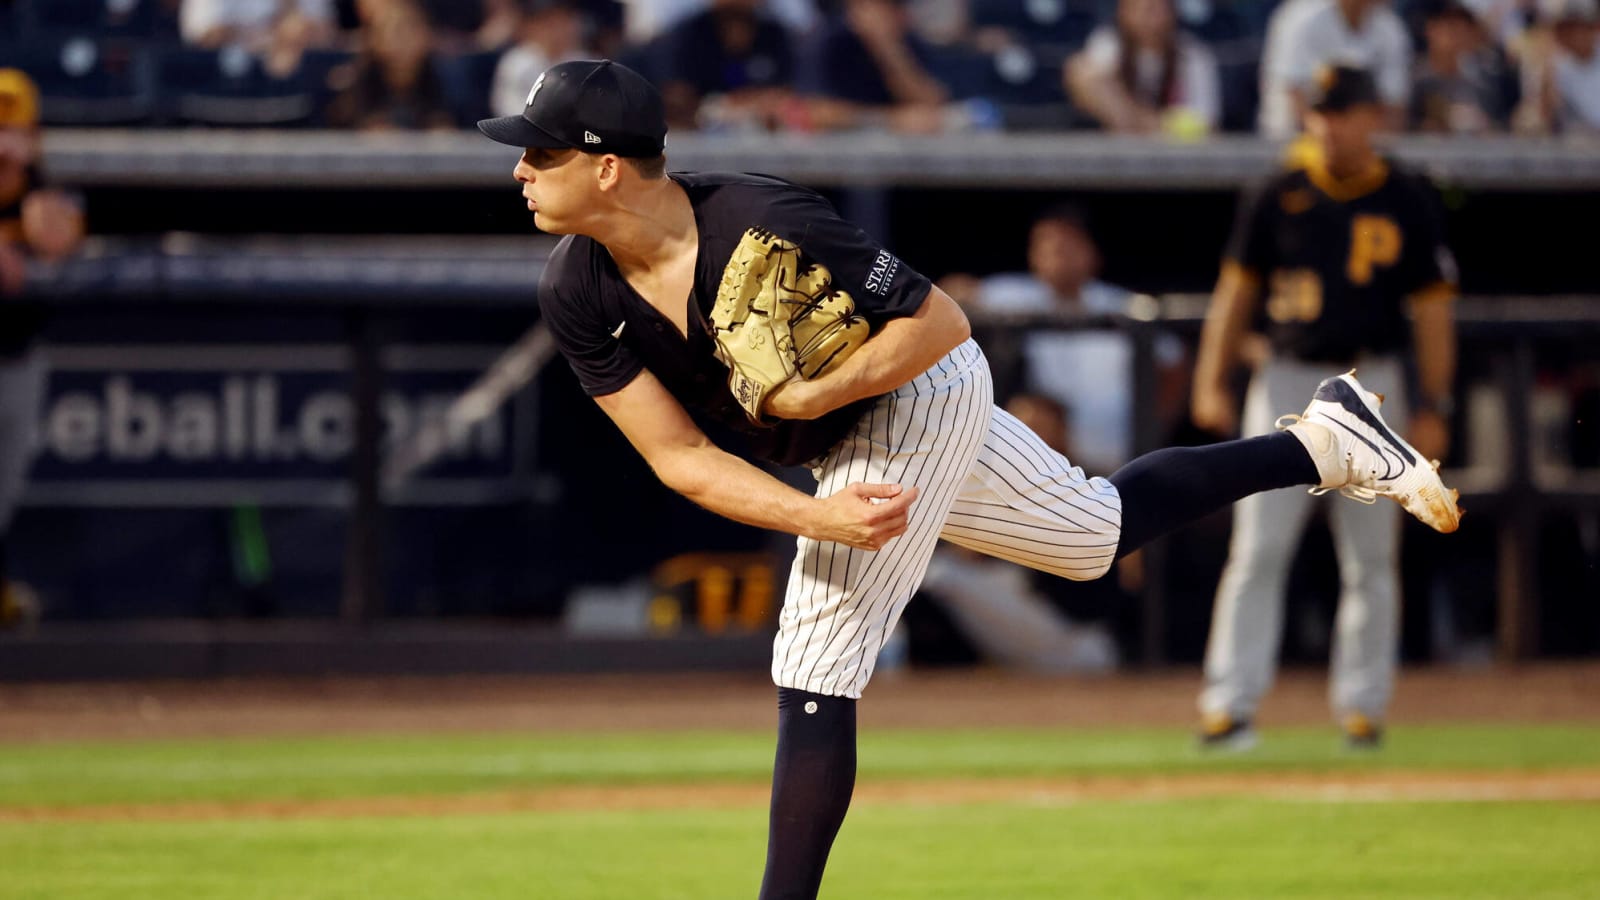 The Yankees struck gold with hard-throwing bullpen arm